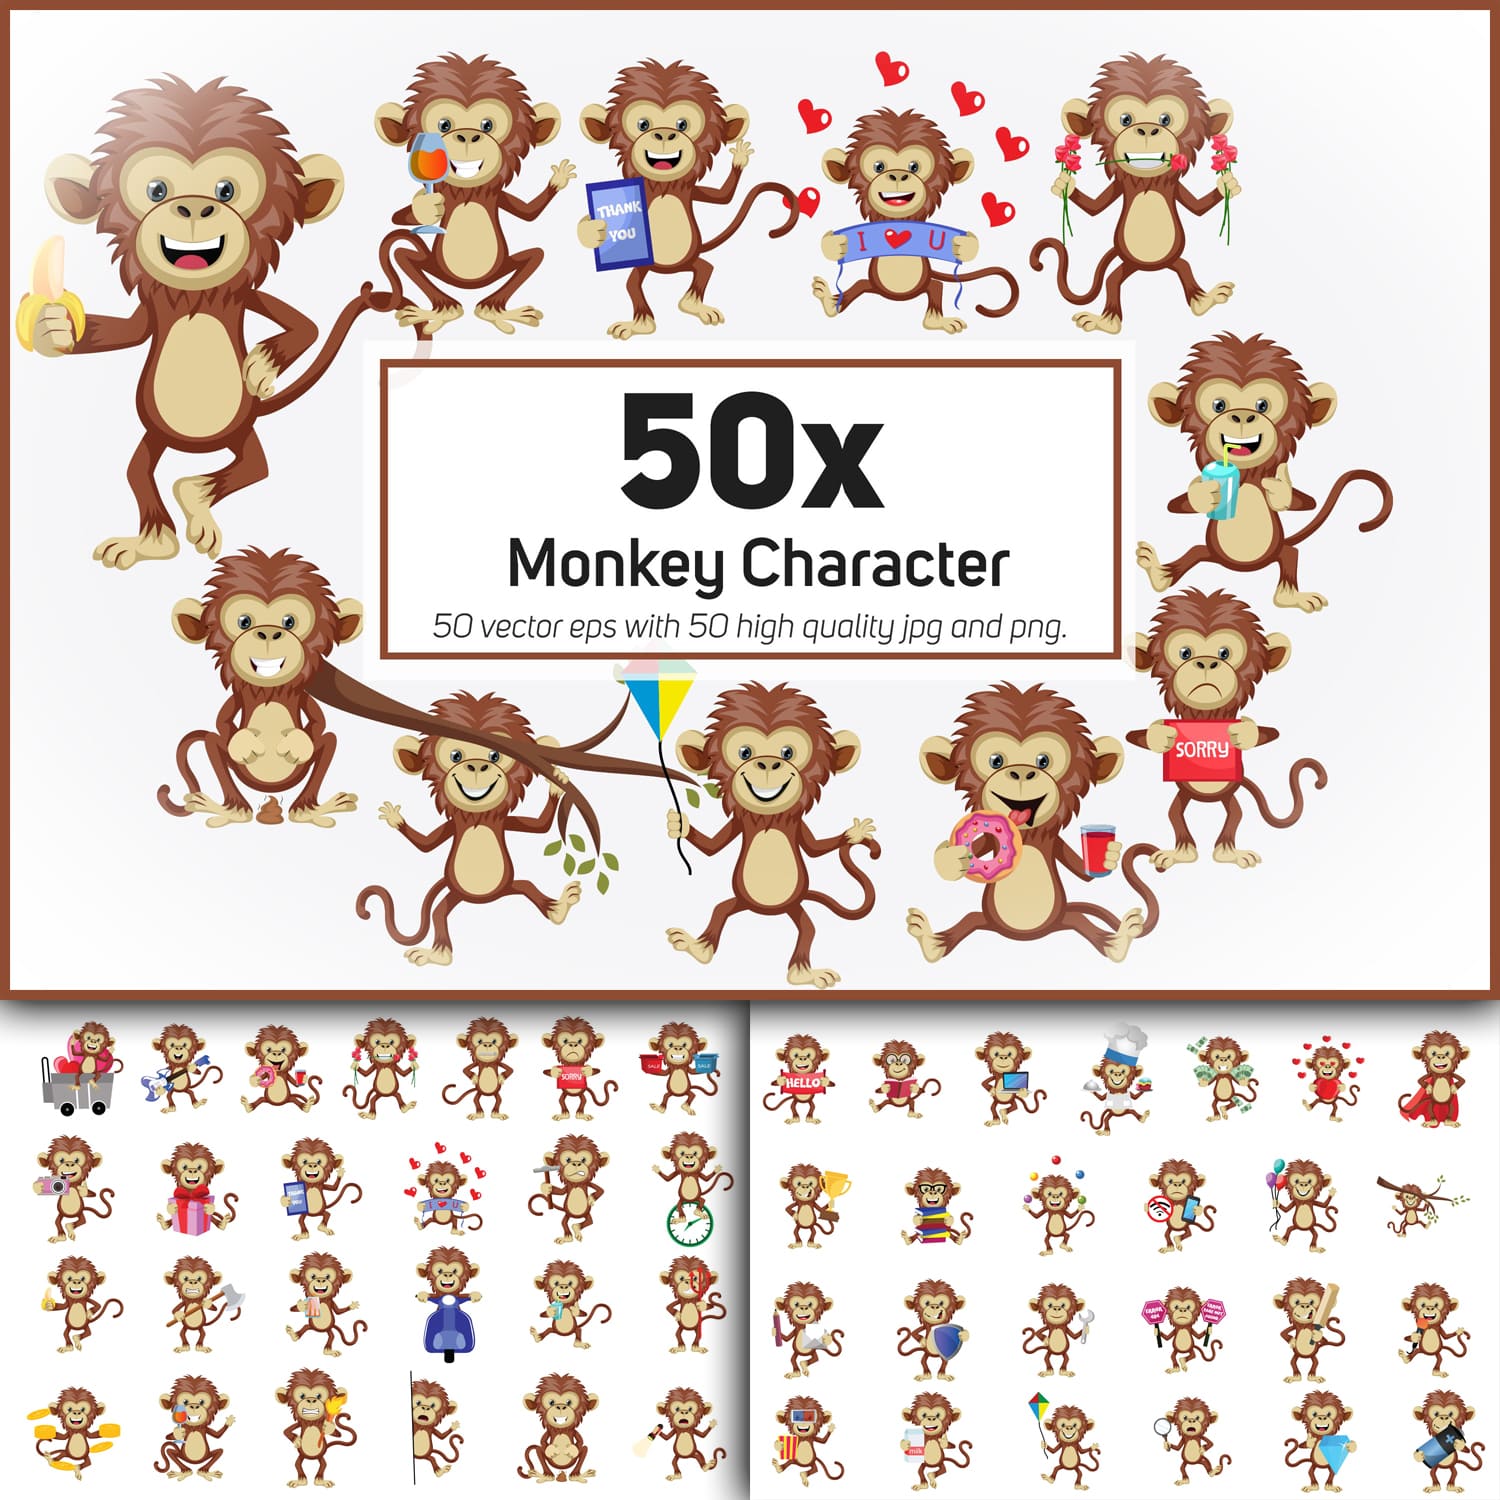 50x Monkey Character or Mascot collection illustration.